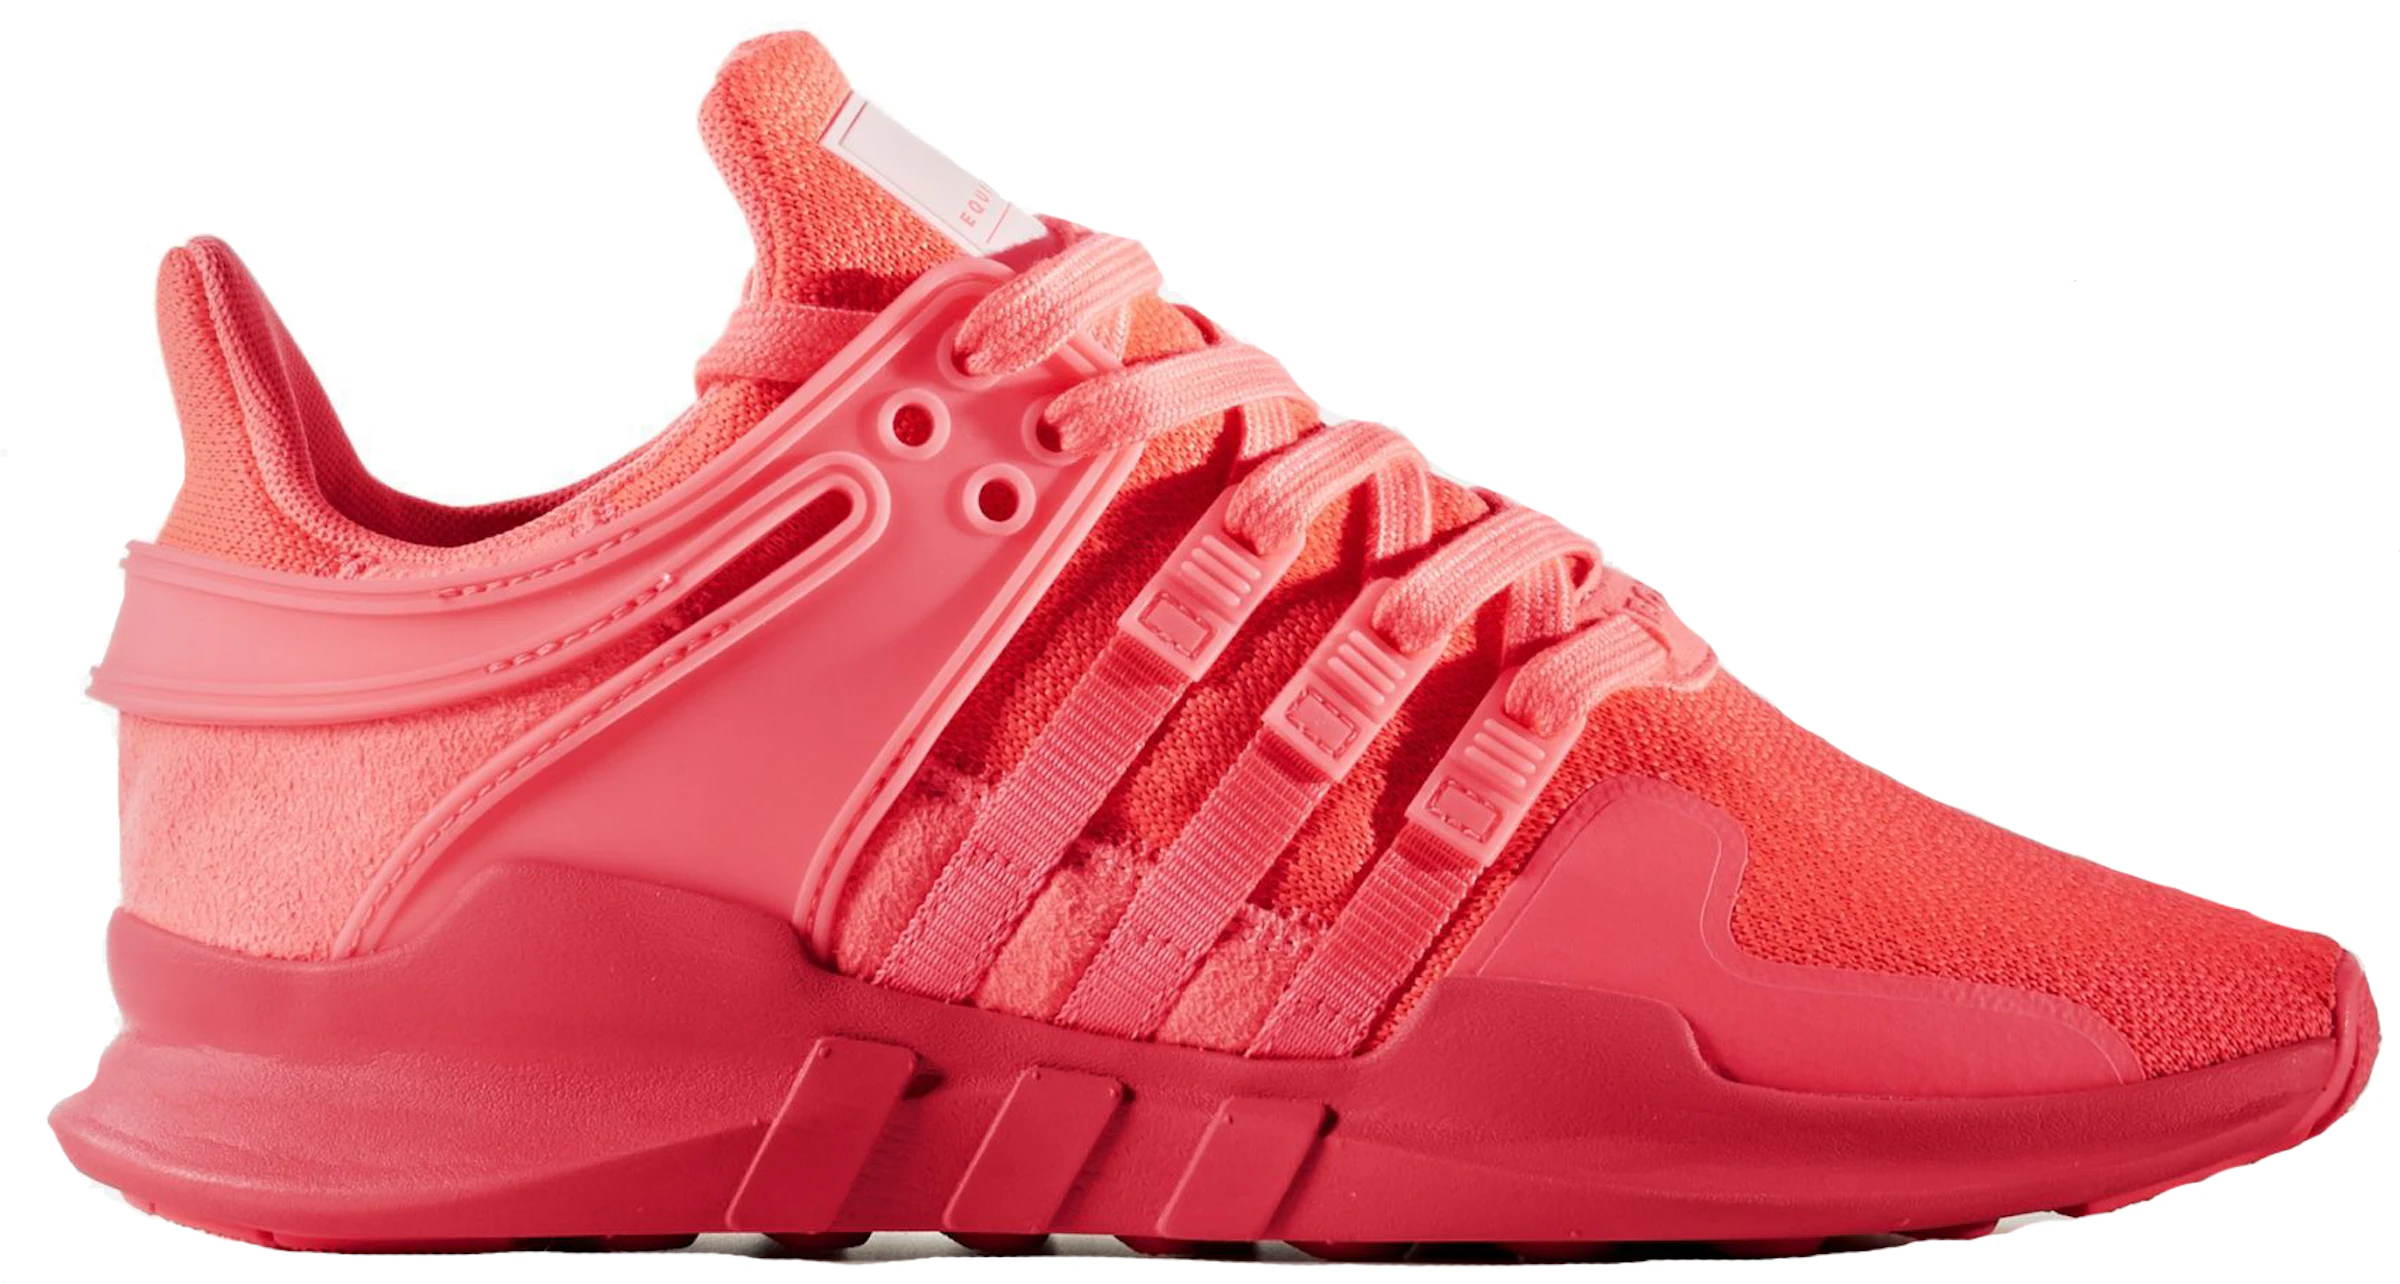 Martin Luther King Junior Pacer Prestador adidas EQT Support ADV Turbo Pink (W) - BB2326 - ES